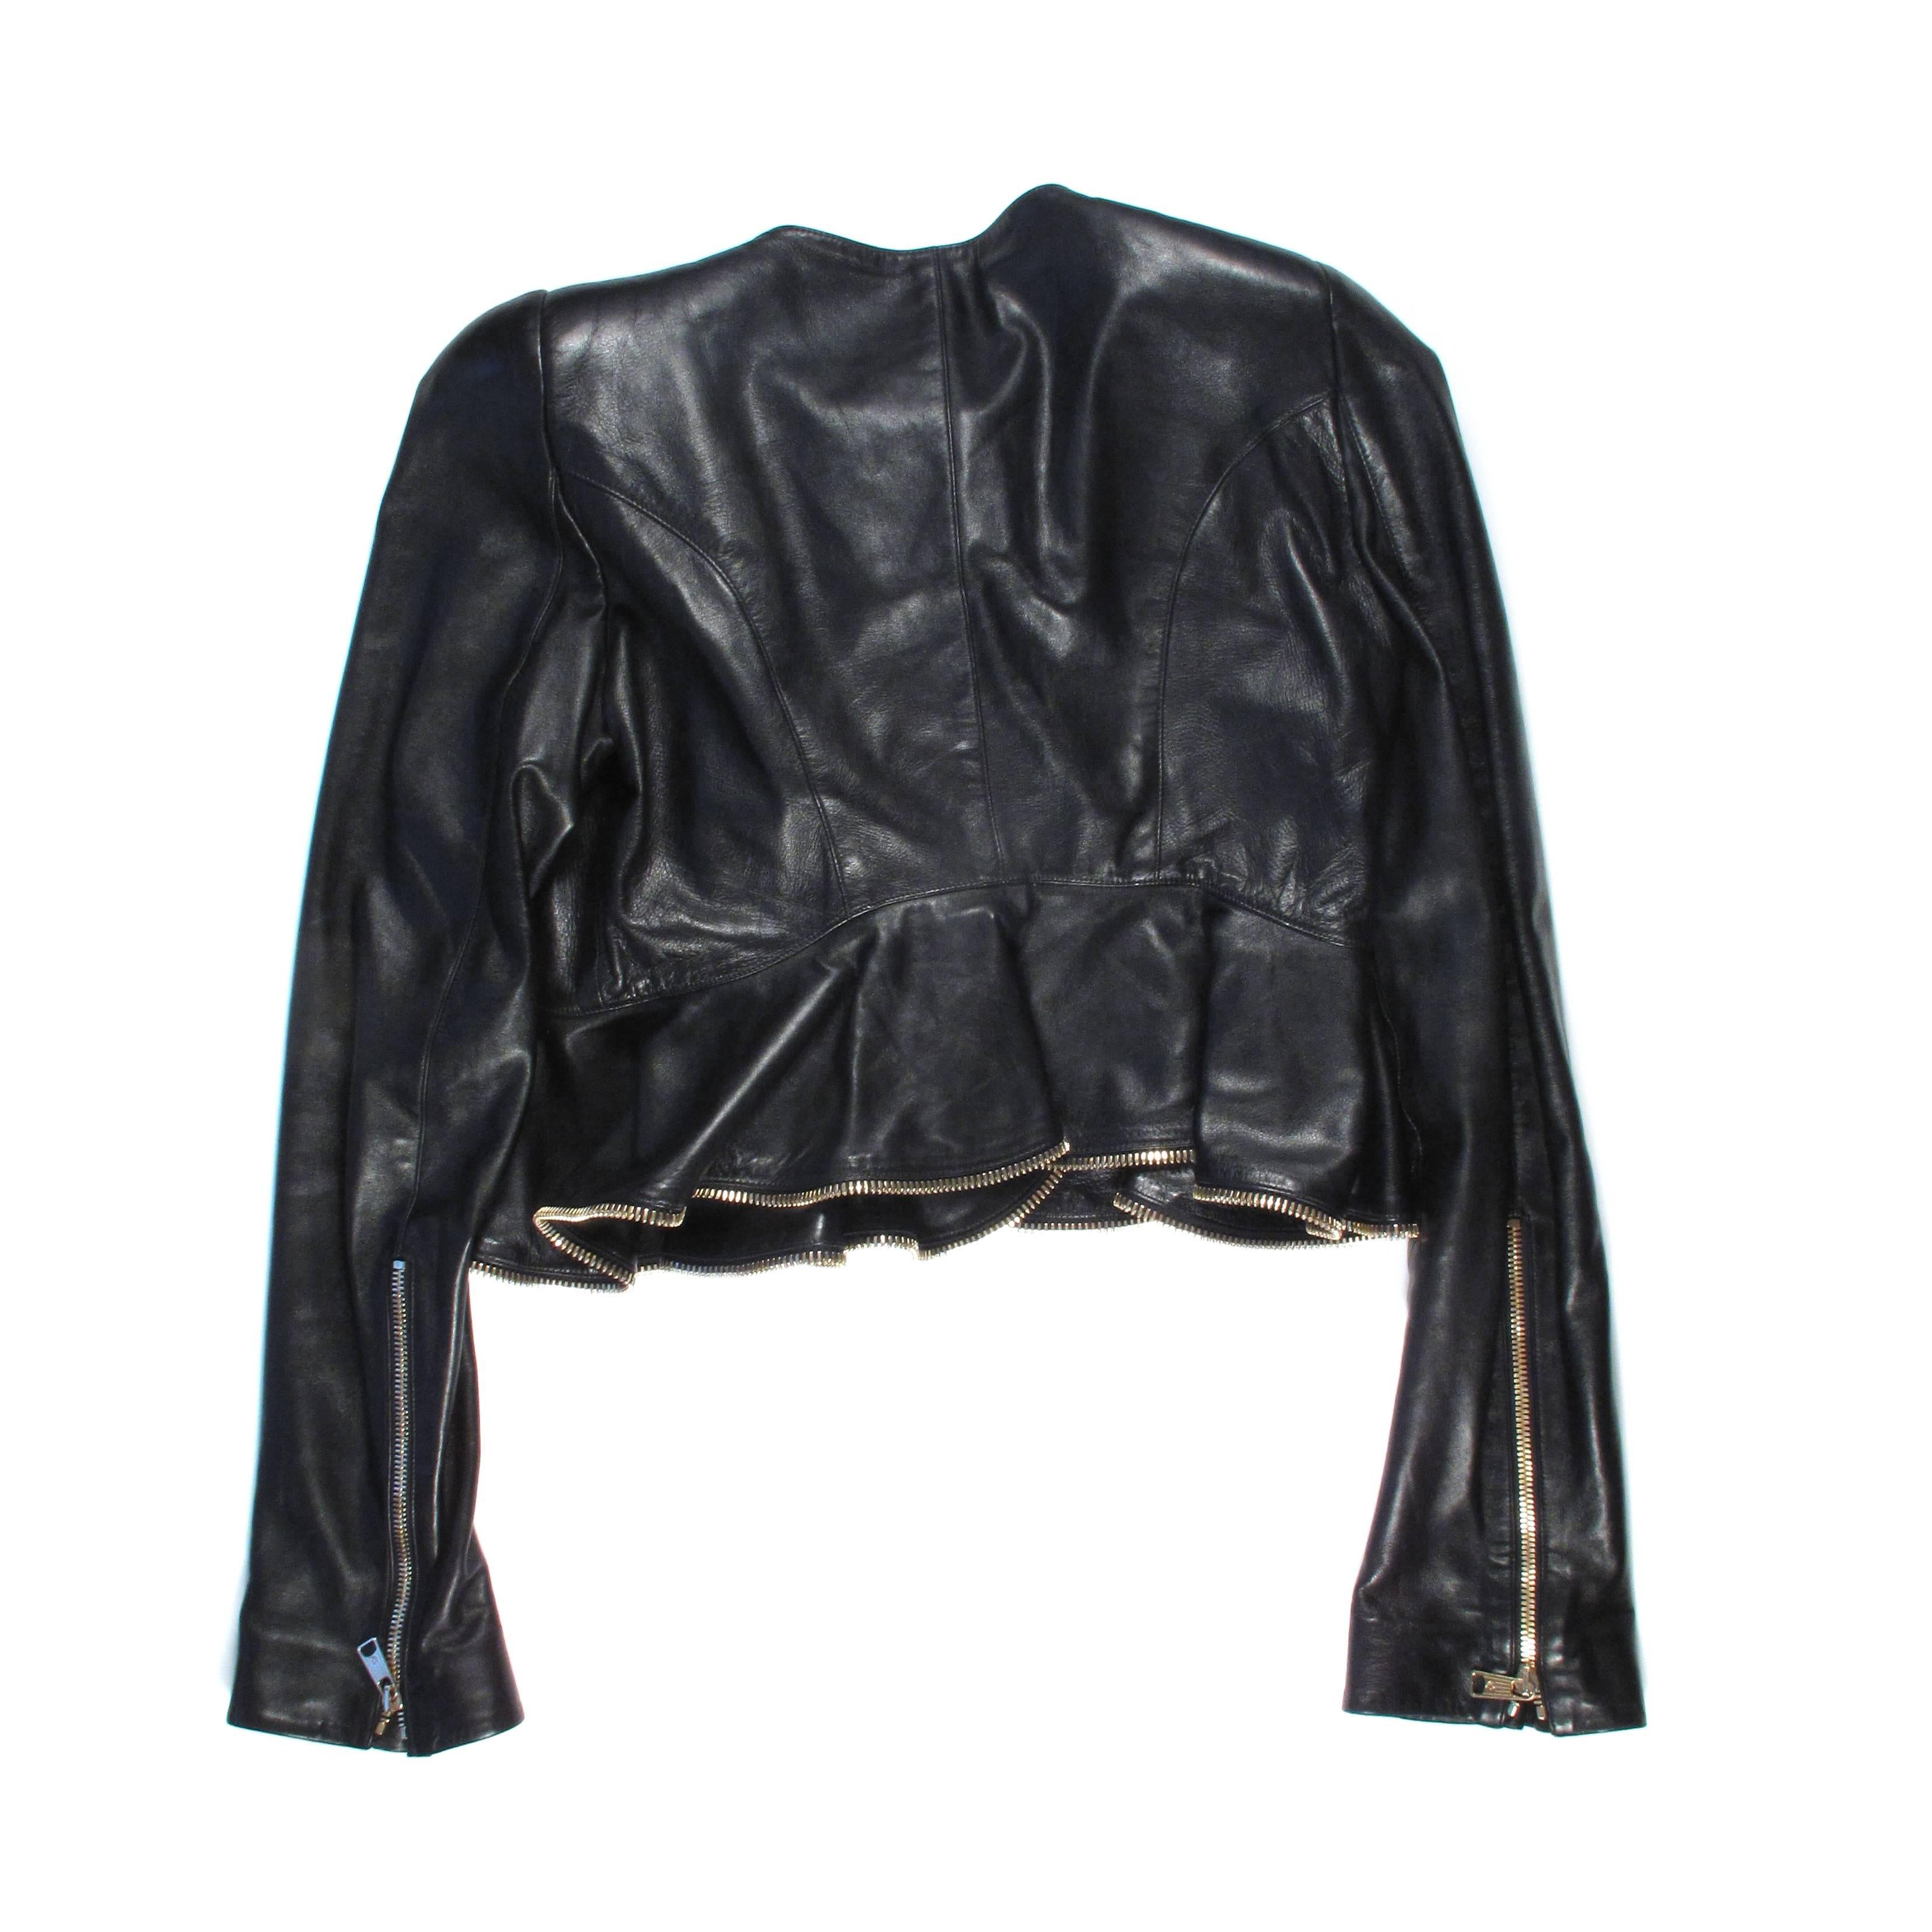 
Alexander McQueen - Ruffle Zipper Leather Jacket

Retail: $6200.00

Size:  US 4 - Euro 36 - Italian 40

Color: Black

Material: Leather

------------------------------------------------------------

Details:

- front peg in hole